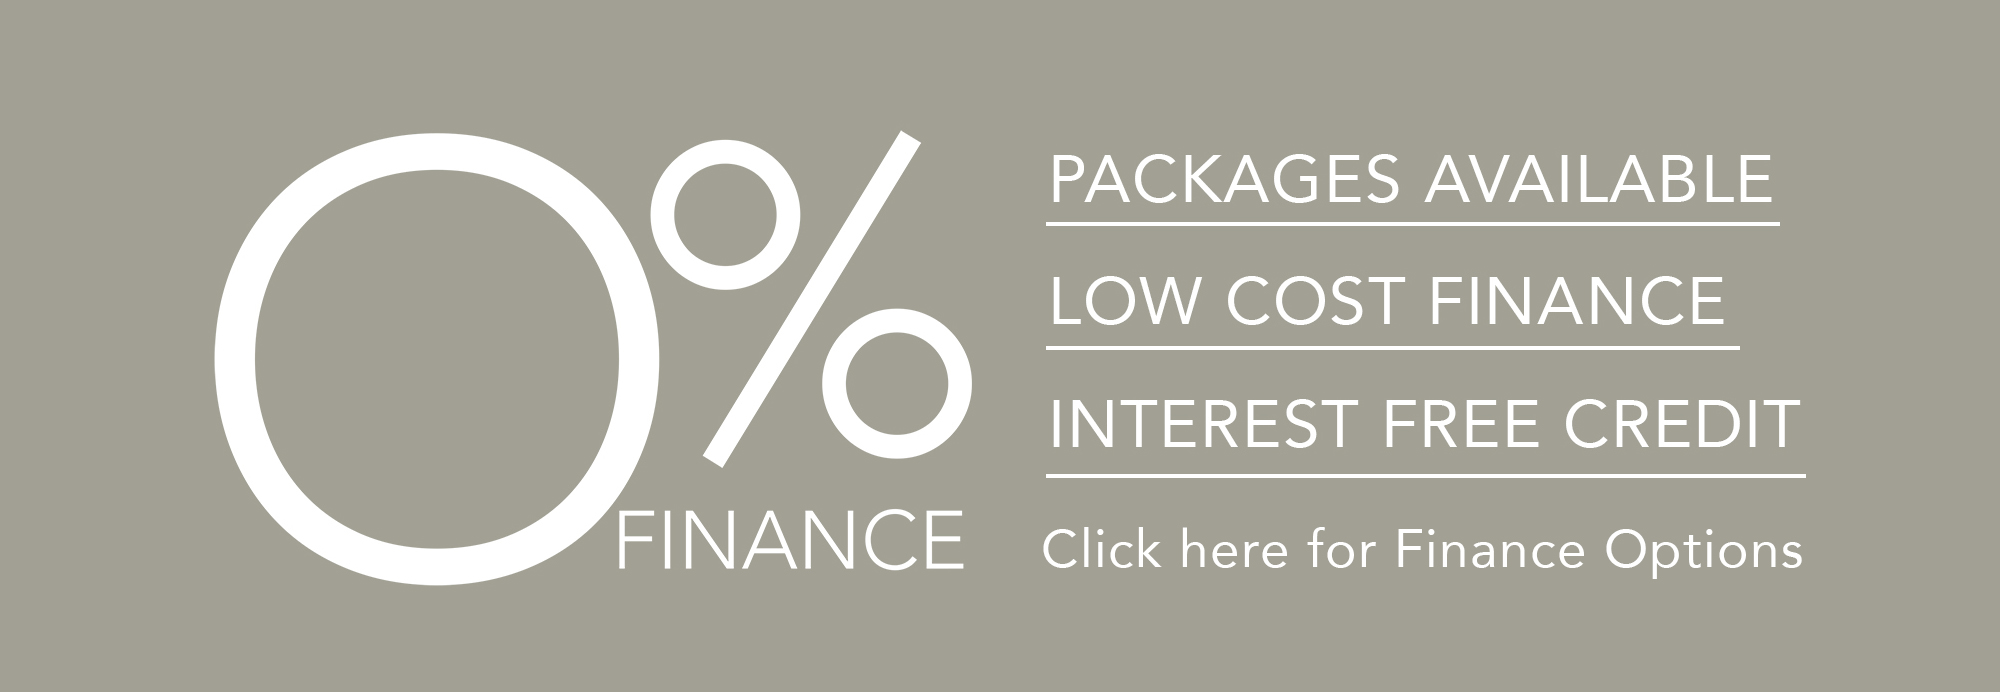 0% Finance Options Available - Click to find out more